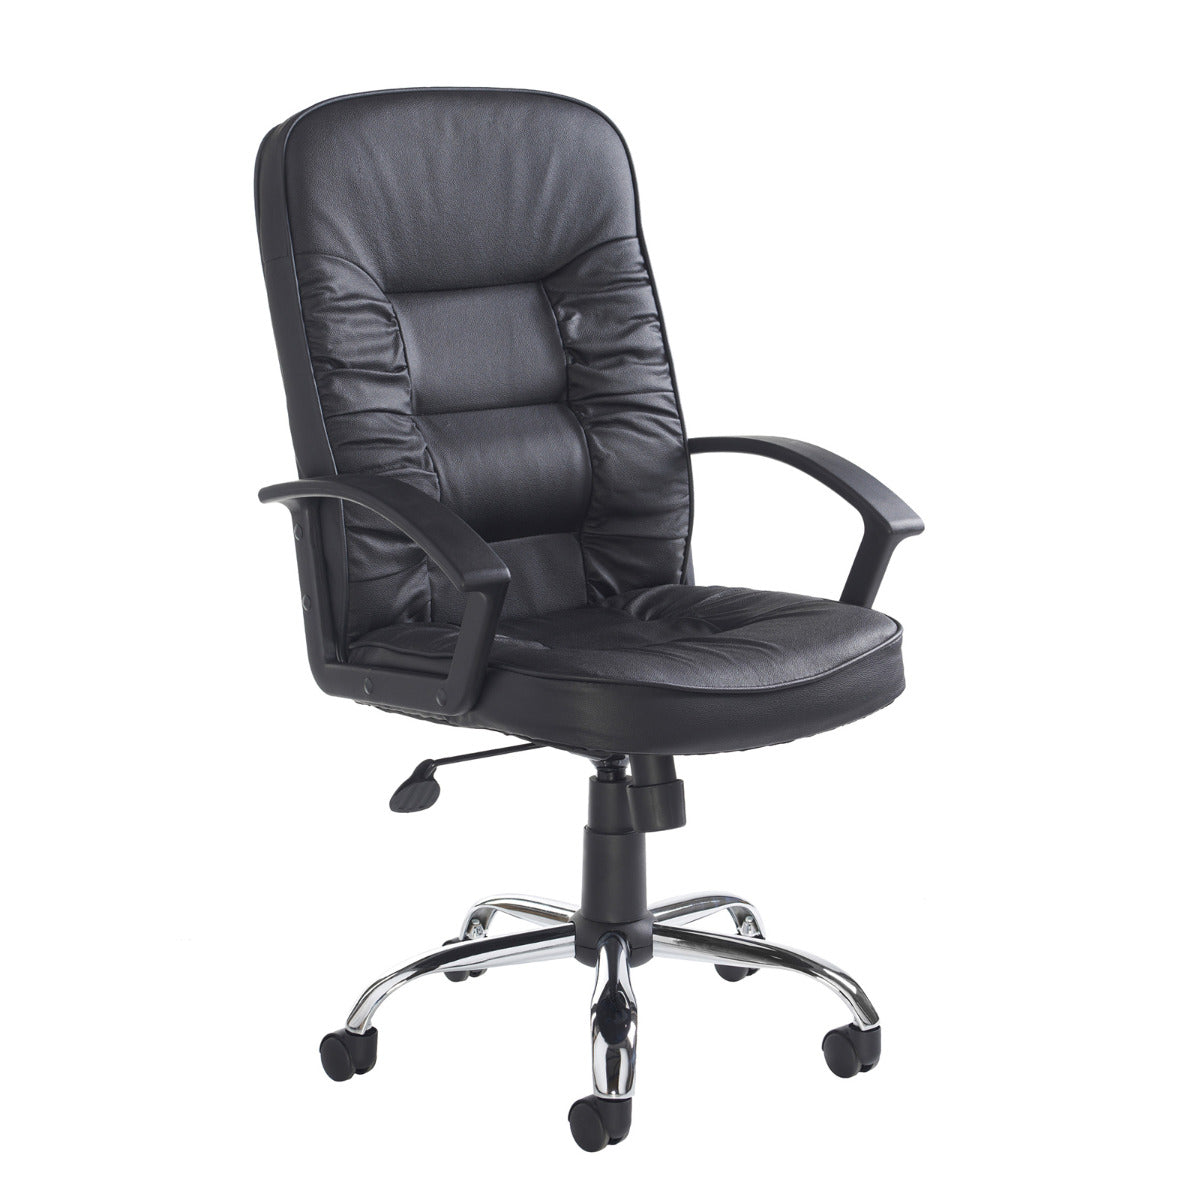 Hertford High Back Black Leather Faced Managers Office Chair UK